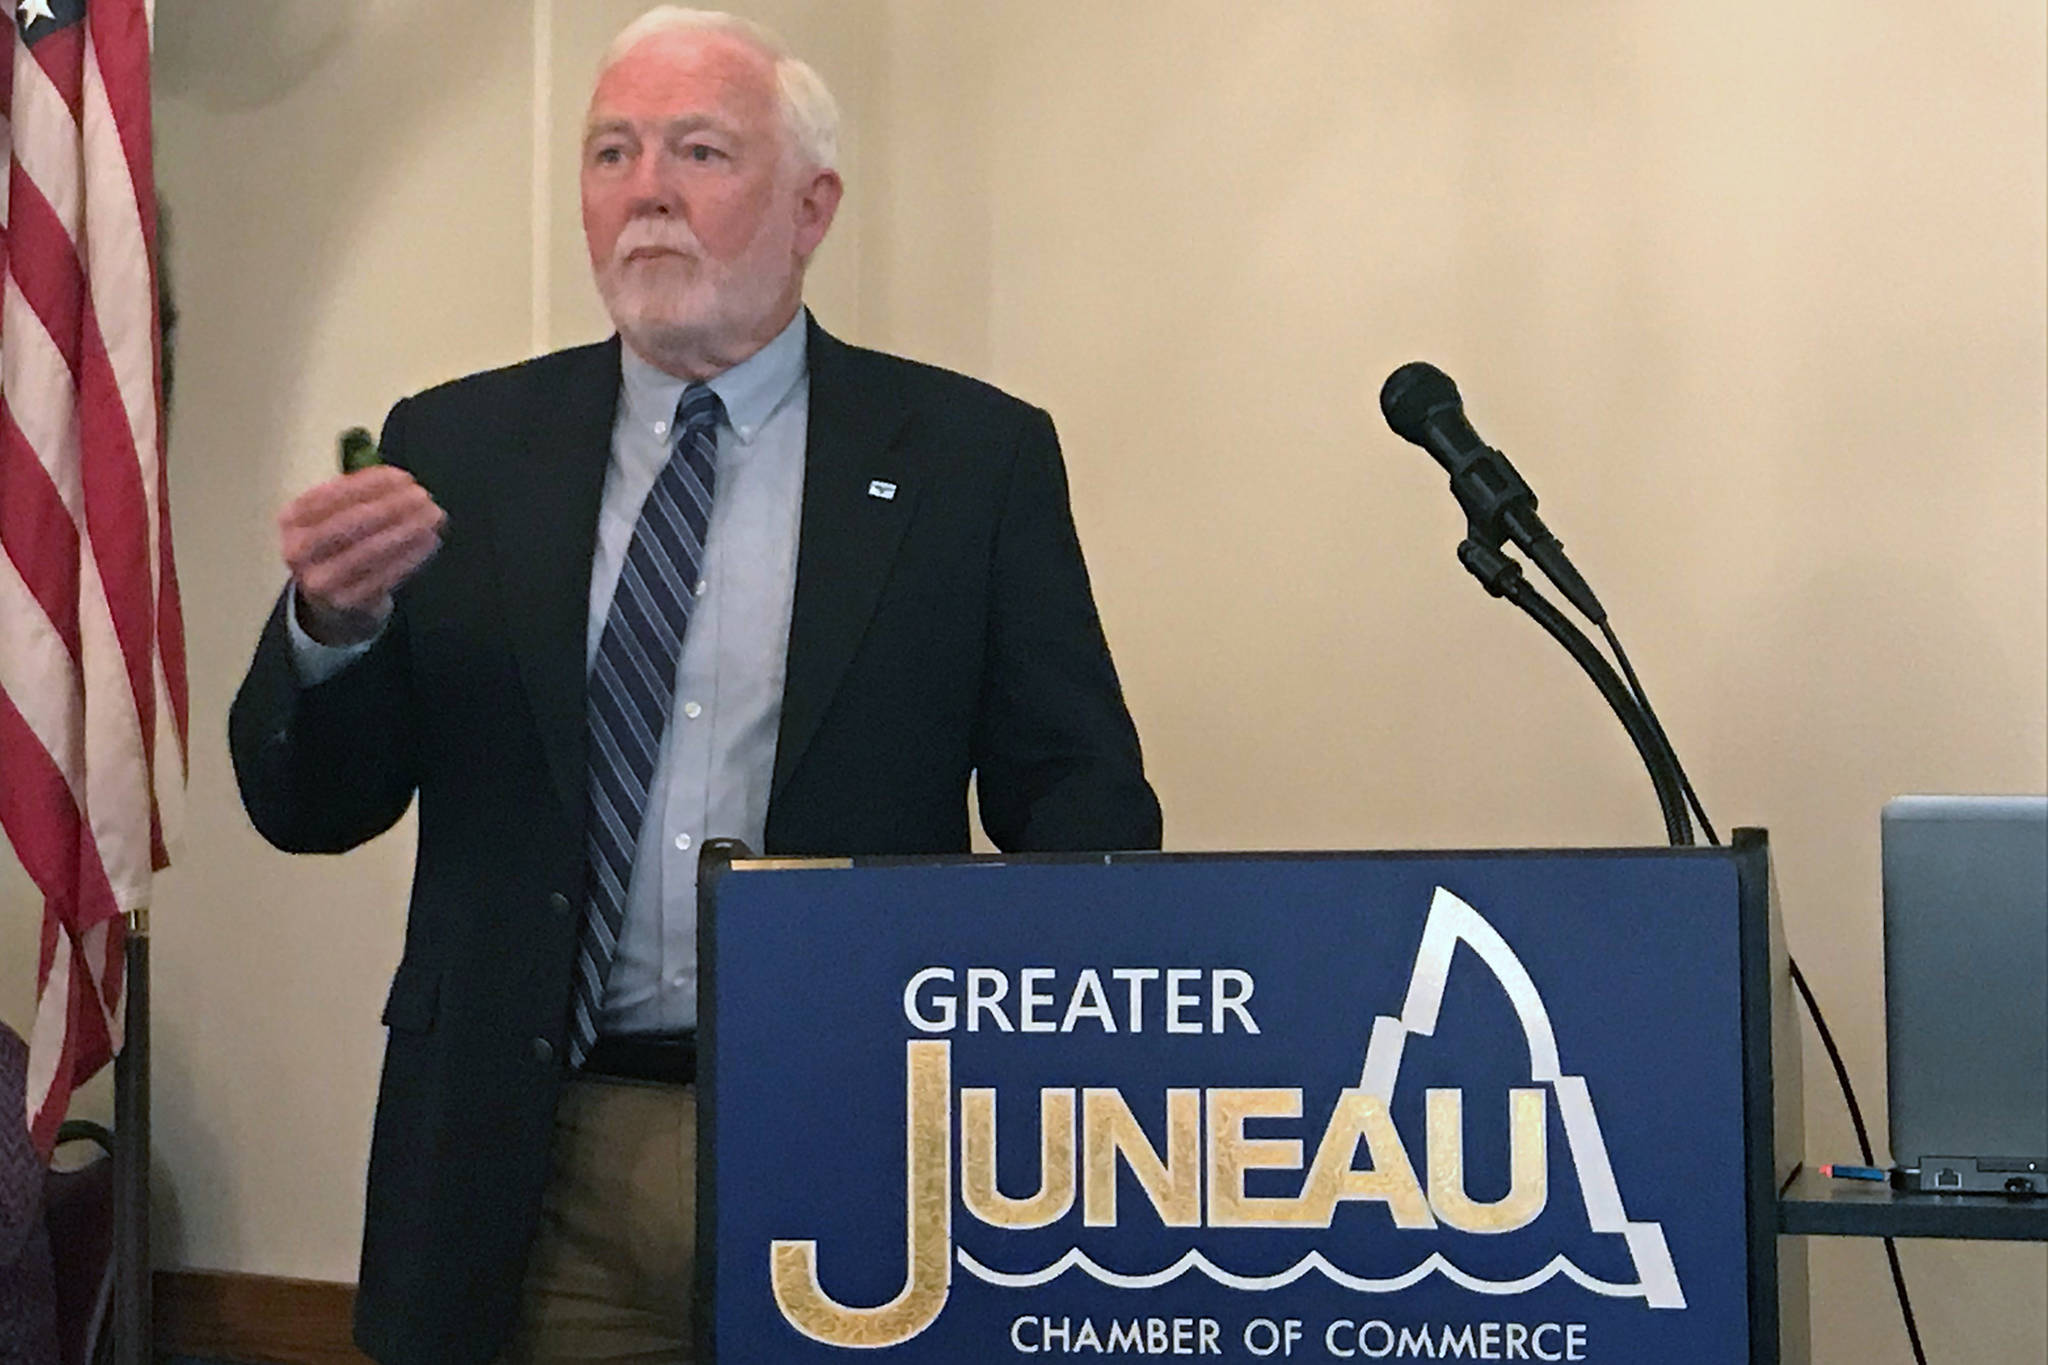 University of Alaska Southeast Chancellor Rick Caulfield speaks at the Juneau Chamber of Commerce luncheon at the Moose Lodge on Thursday, May 30, 2019. (Alex McCarthy | Juneau Empire)